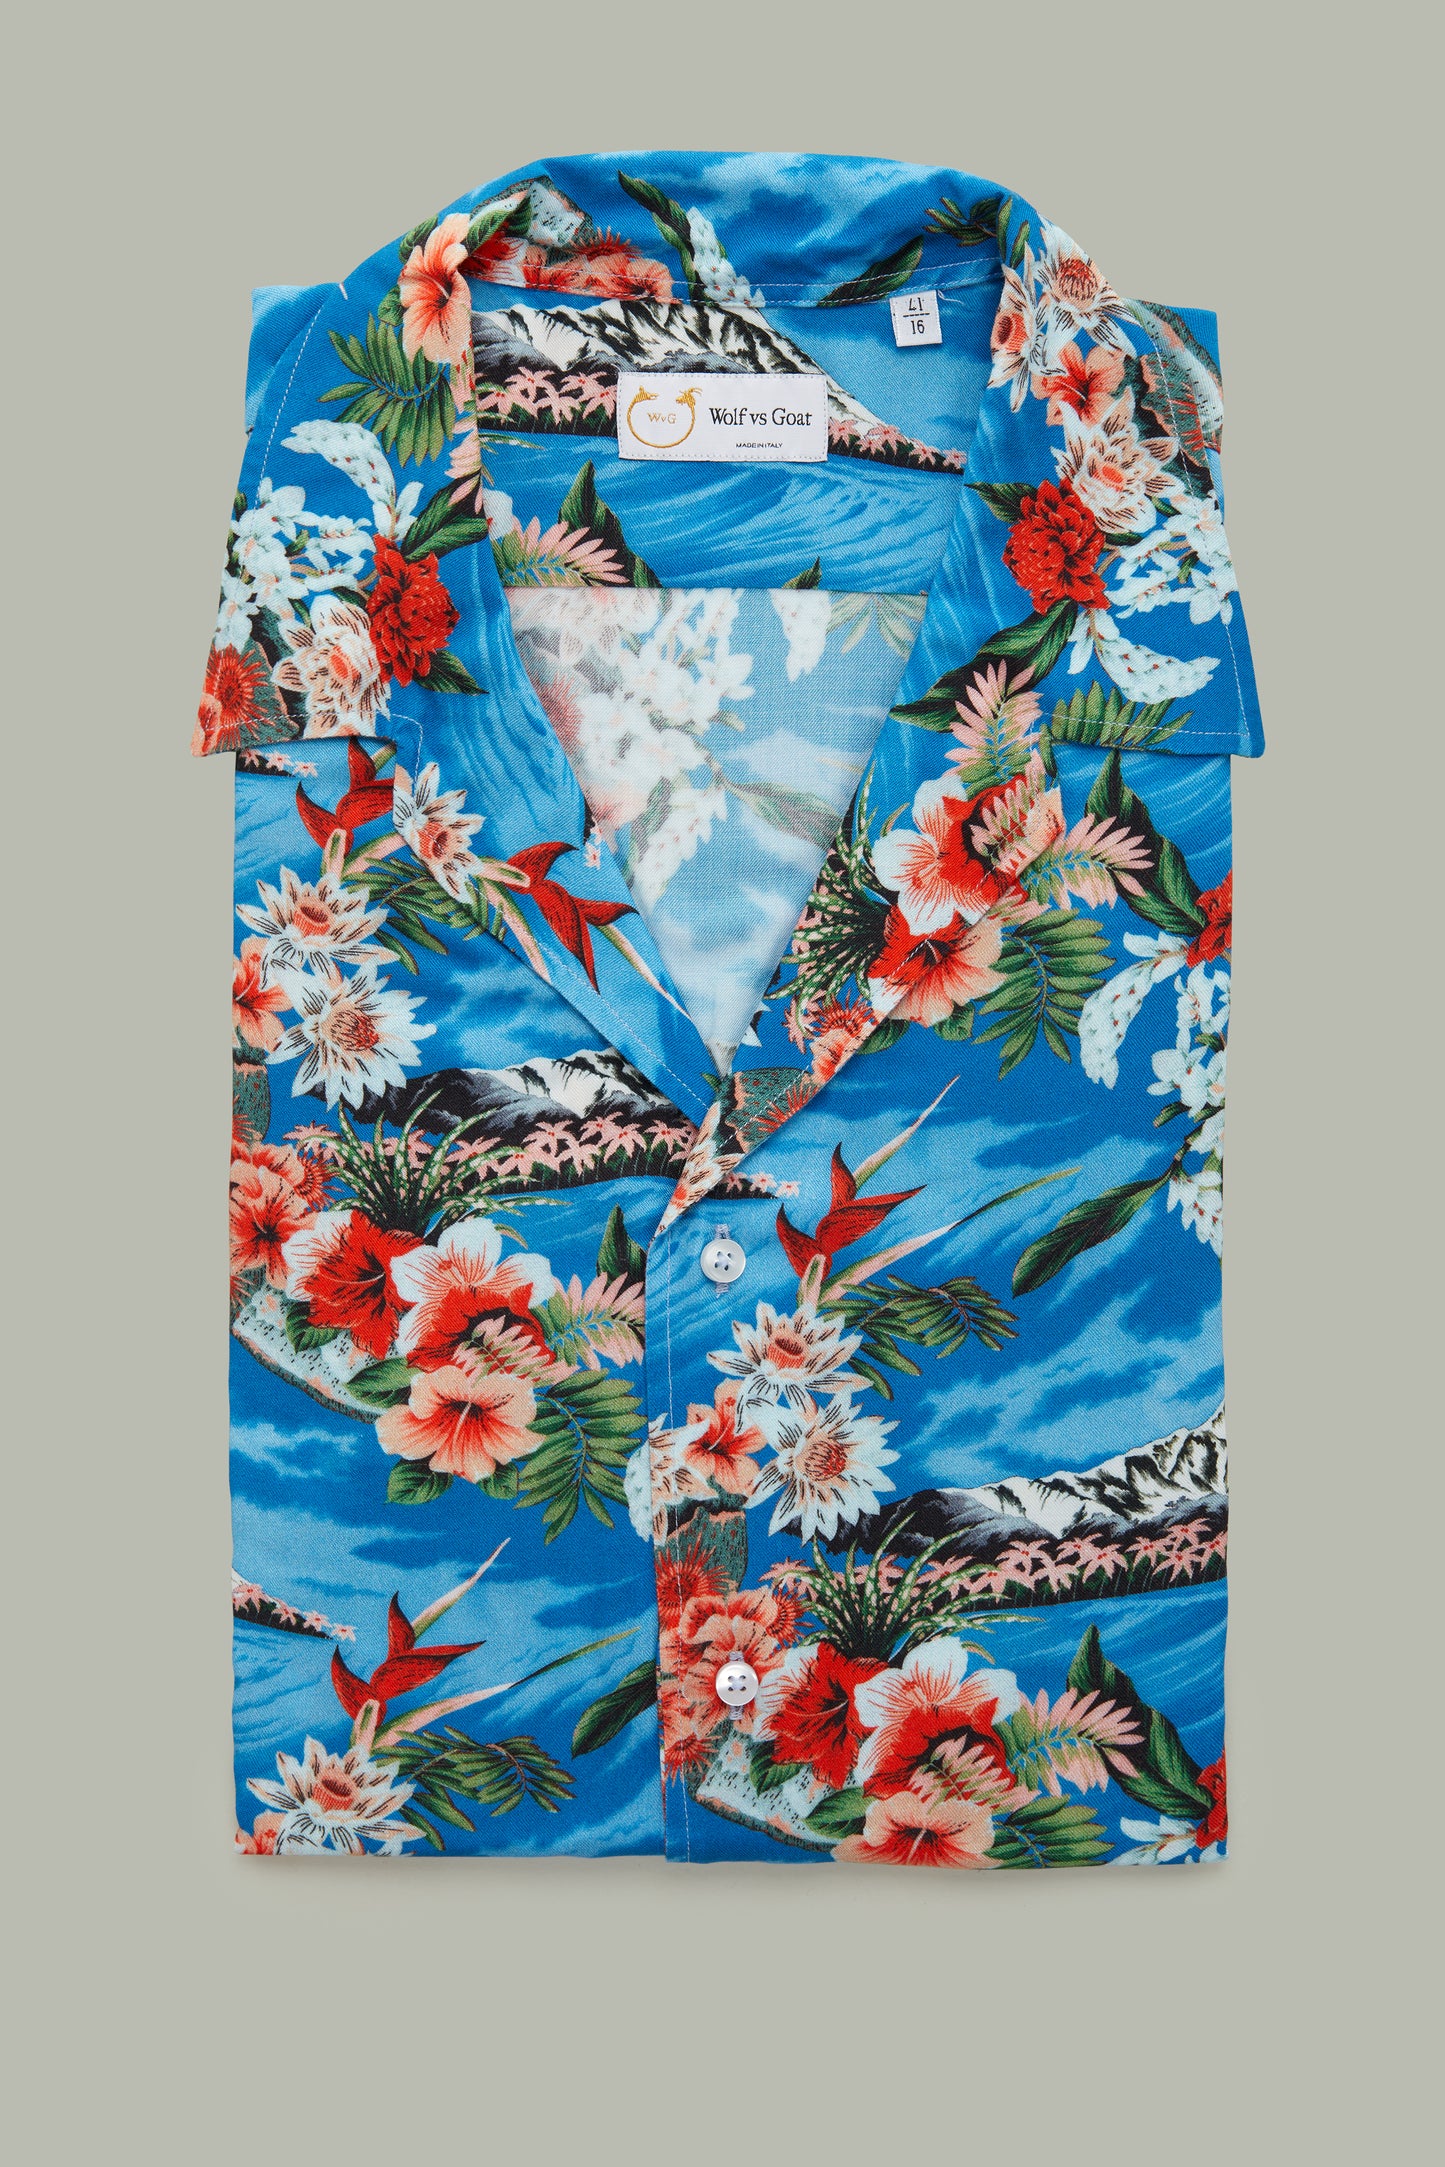 Flowers with Island Short Sleeve Bowling Shirt